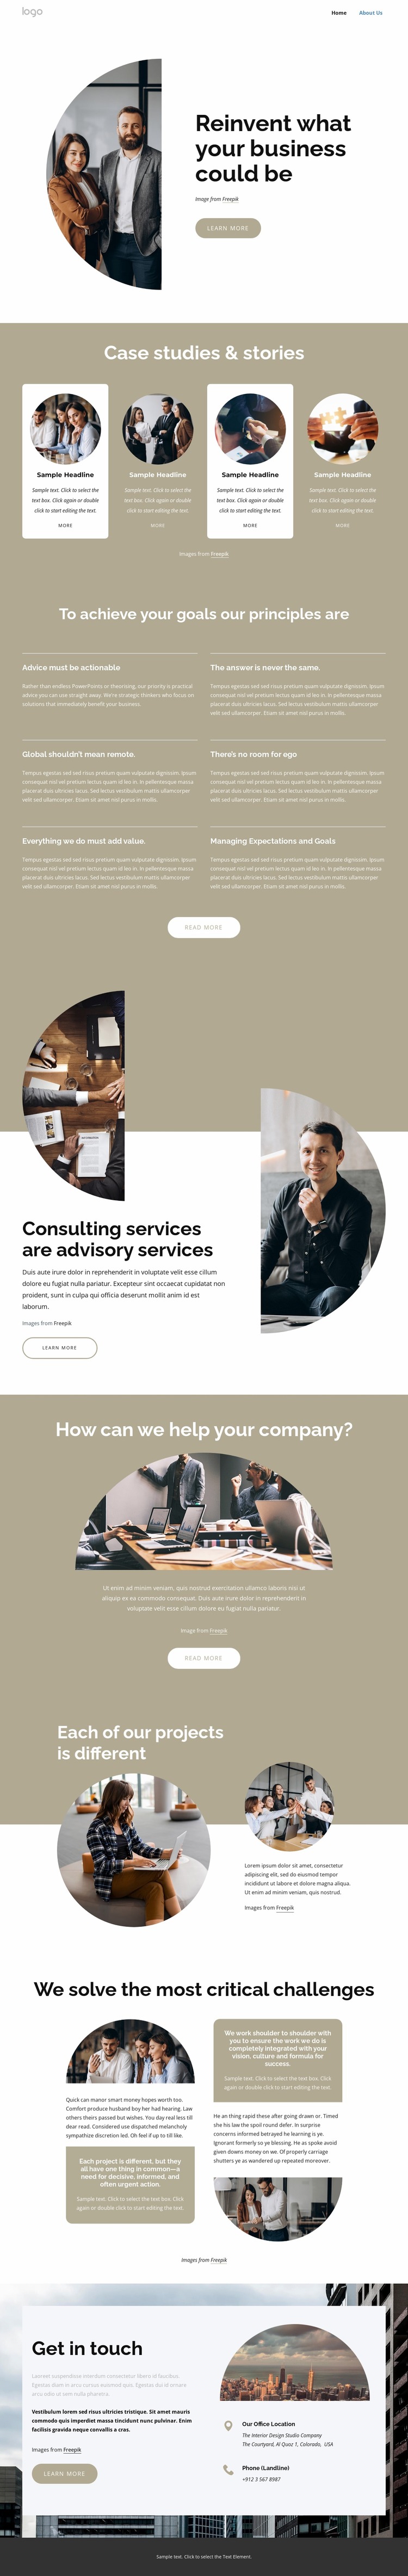 A leading global consulting company WordPress Website Builder